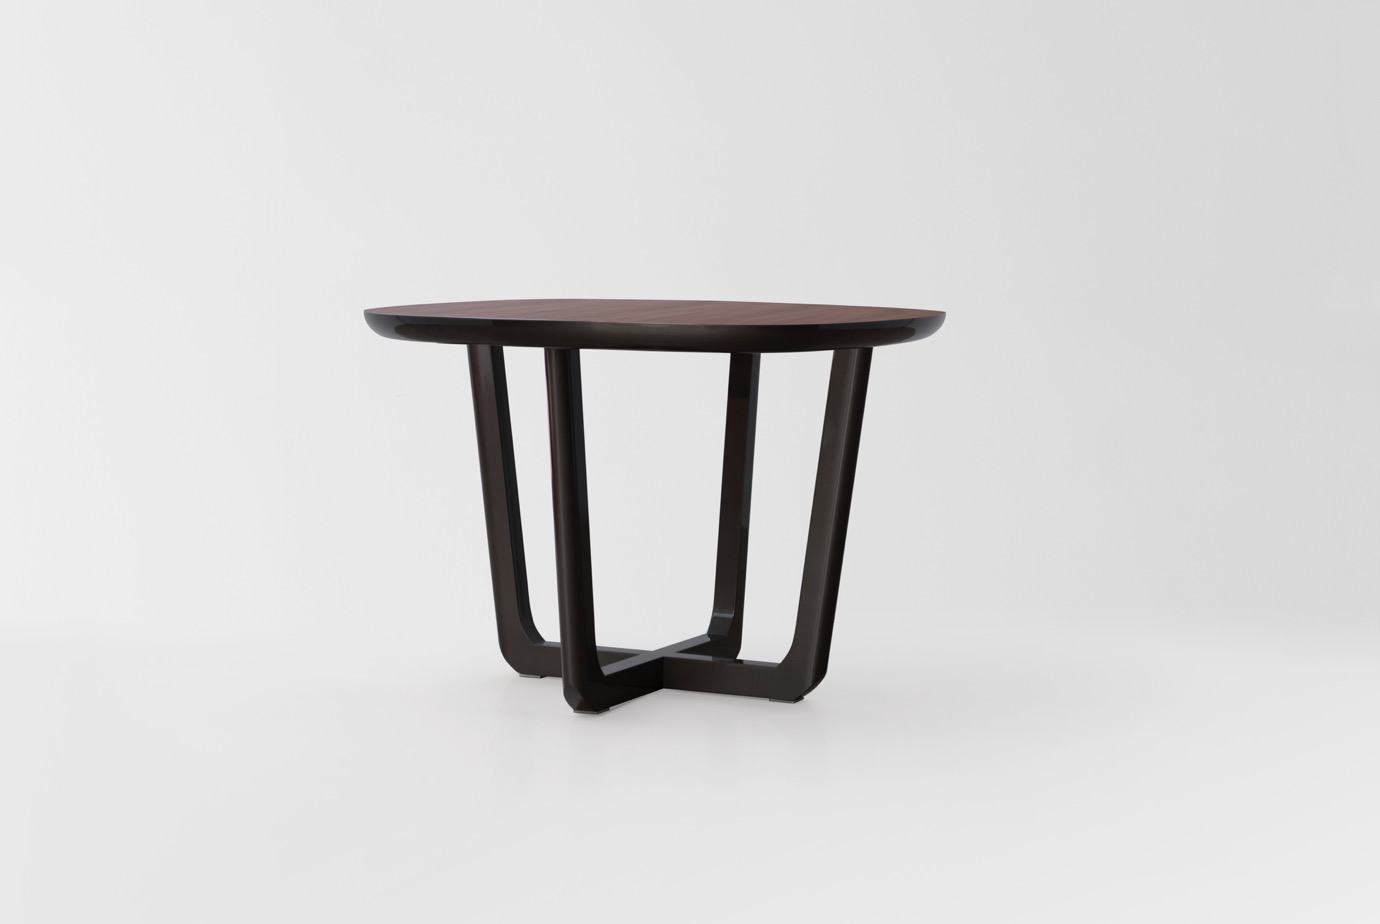 Playing with Textures - Low & Side Tables / Carlos Soriano